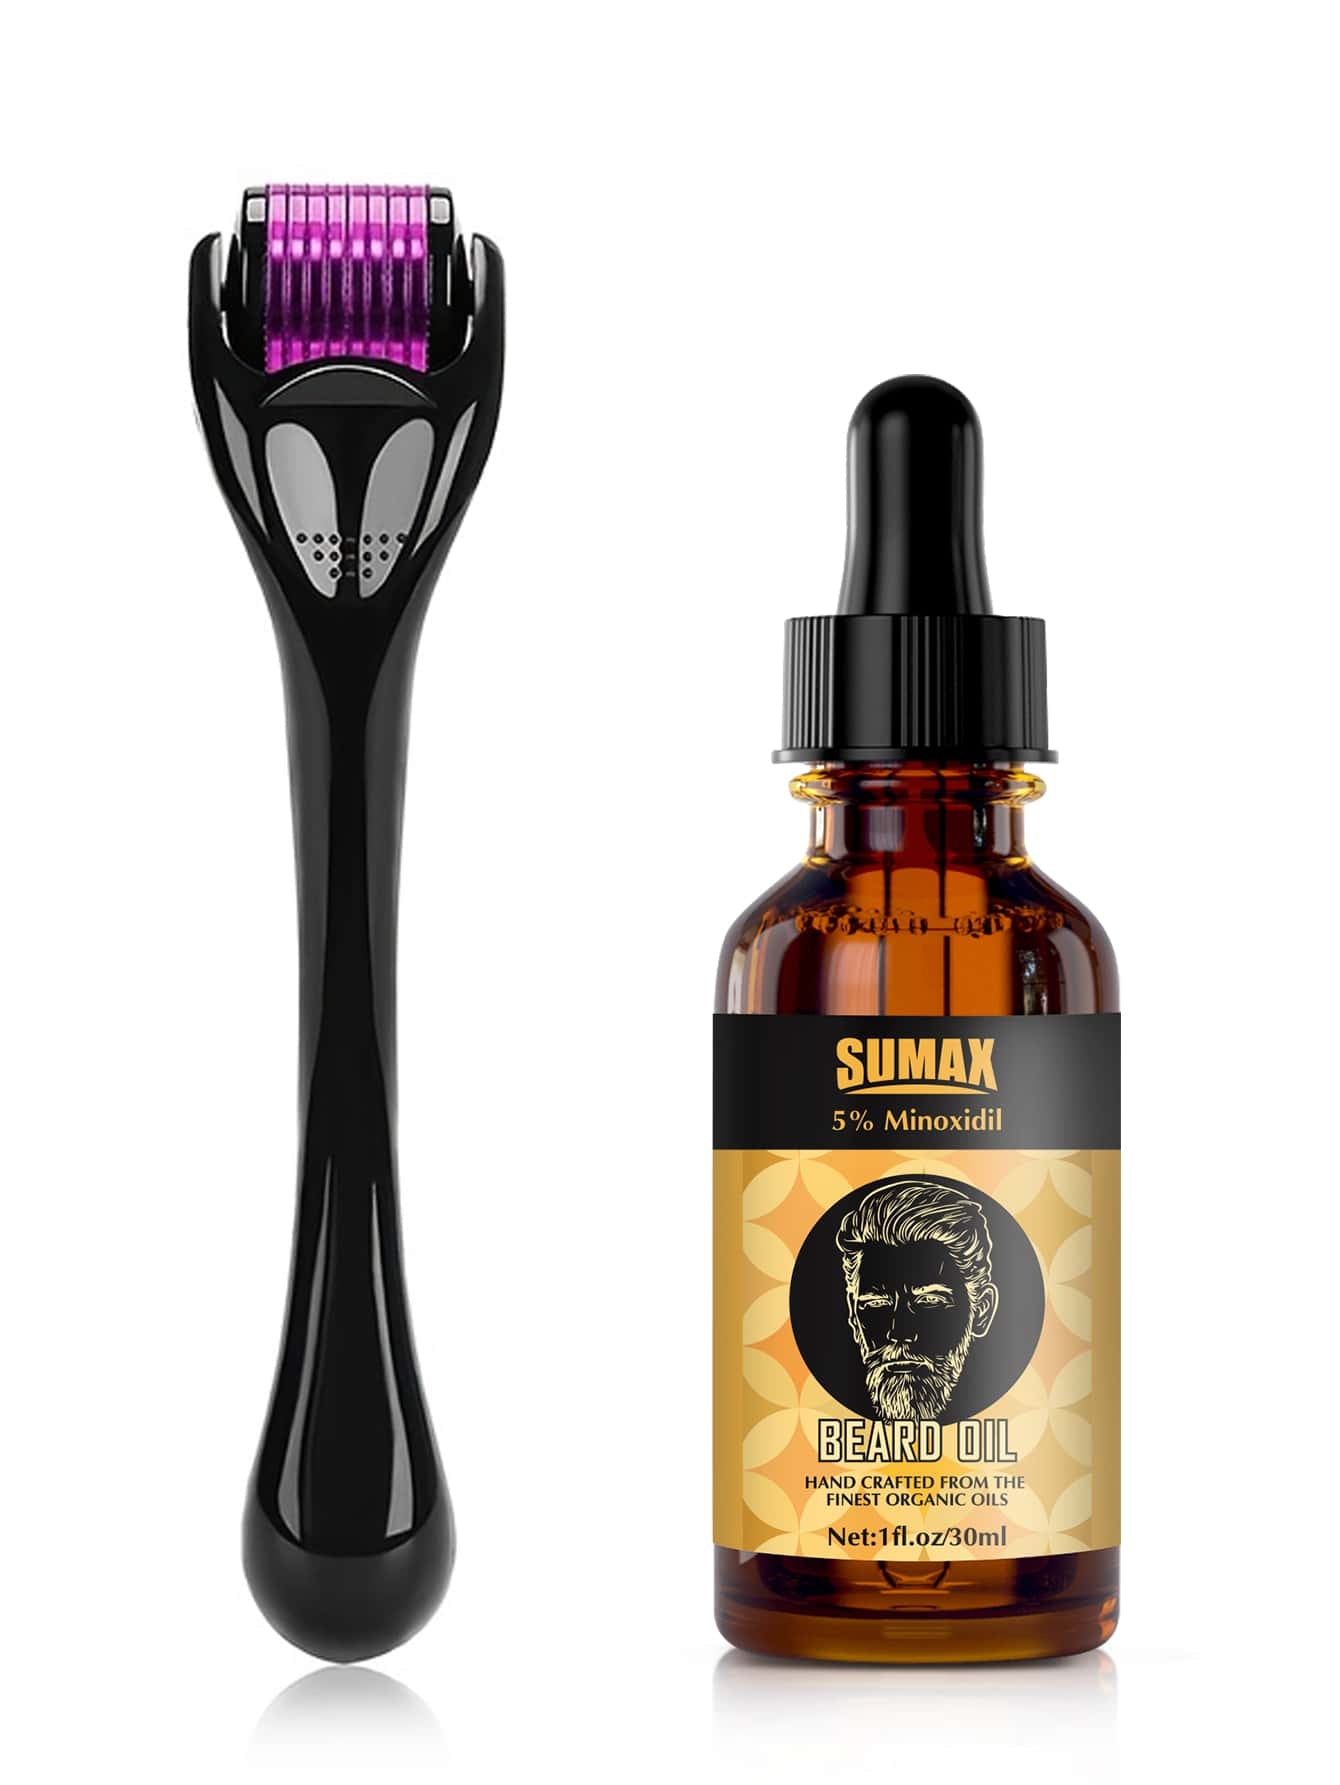 Professional Beard Care Kit with 5% Minoxidil and Smoothing Oil - Achieve a Smooth, Shiny Beard with Derma Roller and Professional Care